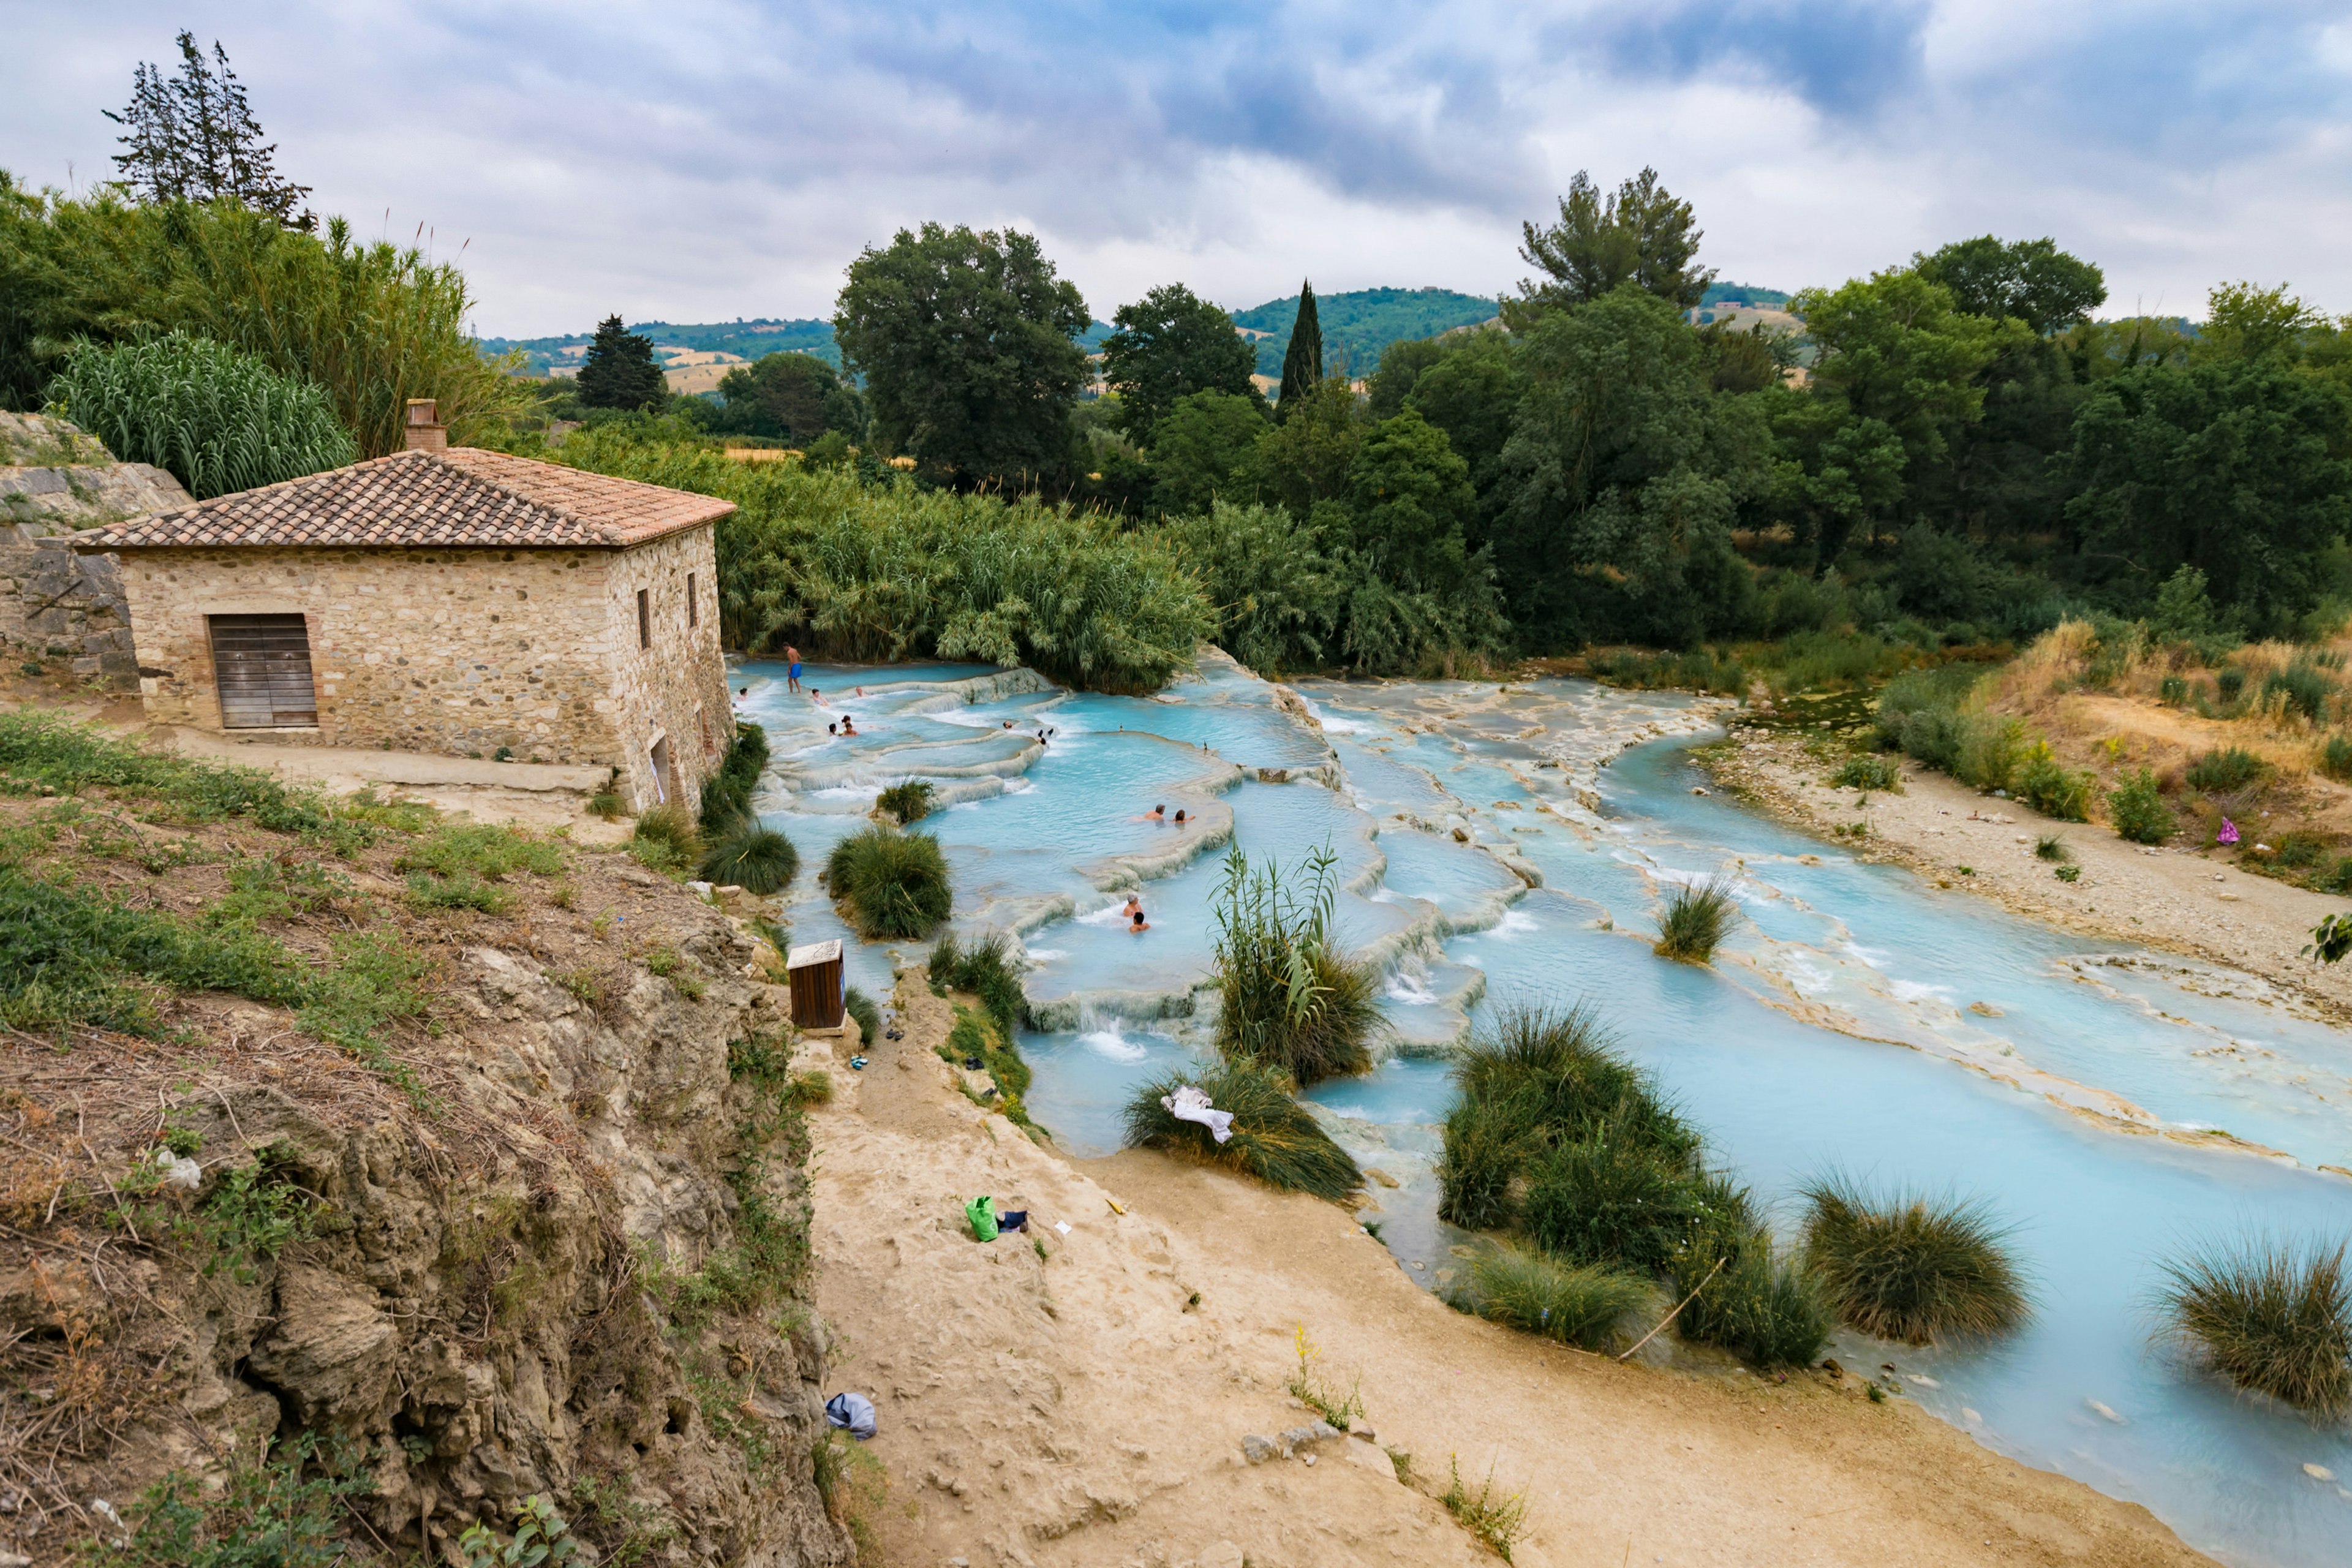 People bathing at a natural spa with waterfalls in Saturnia.
688273828
bath, bathing, cascade, countryside, etruscan, fall, geothermal, hot water, hydrothermal, idyllic, italy, landscape, natural, natural pool, picturesque, river, rural, saturnia, skincare, spa, sulphur, thermal, tuscany, waterfall, wellness